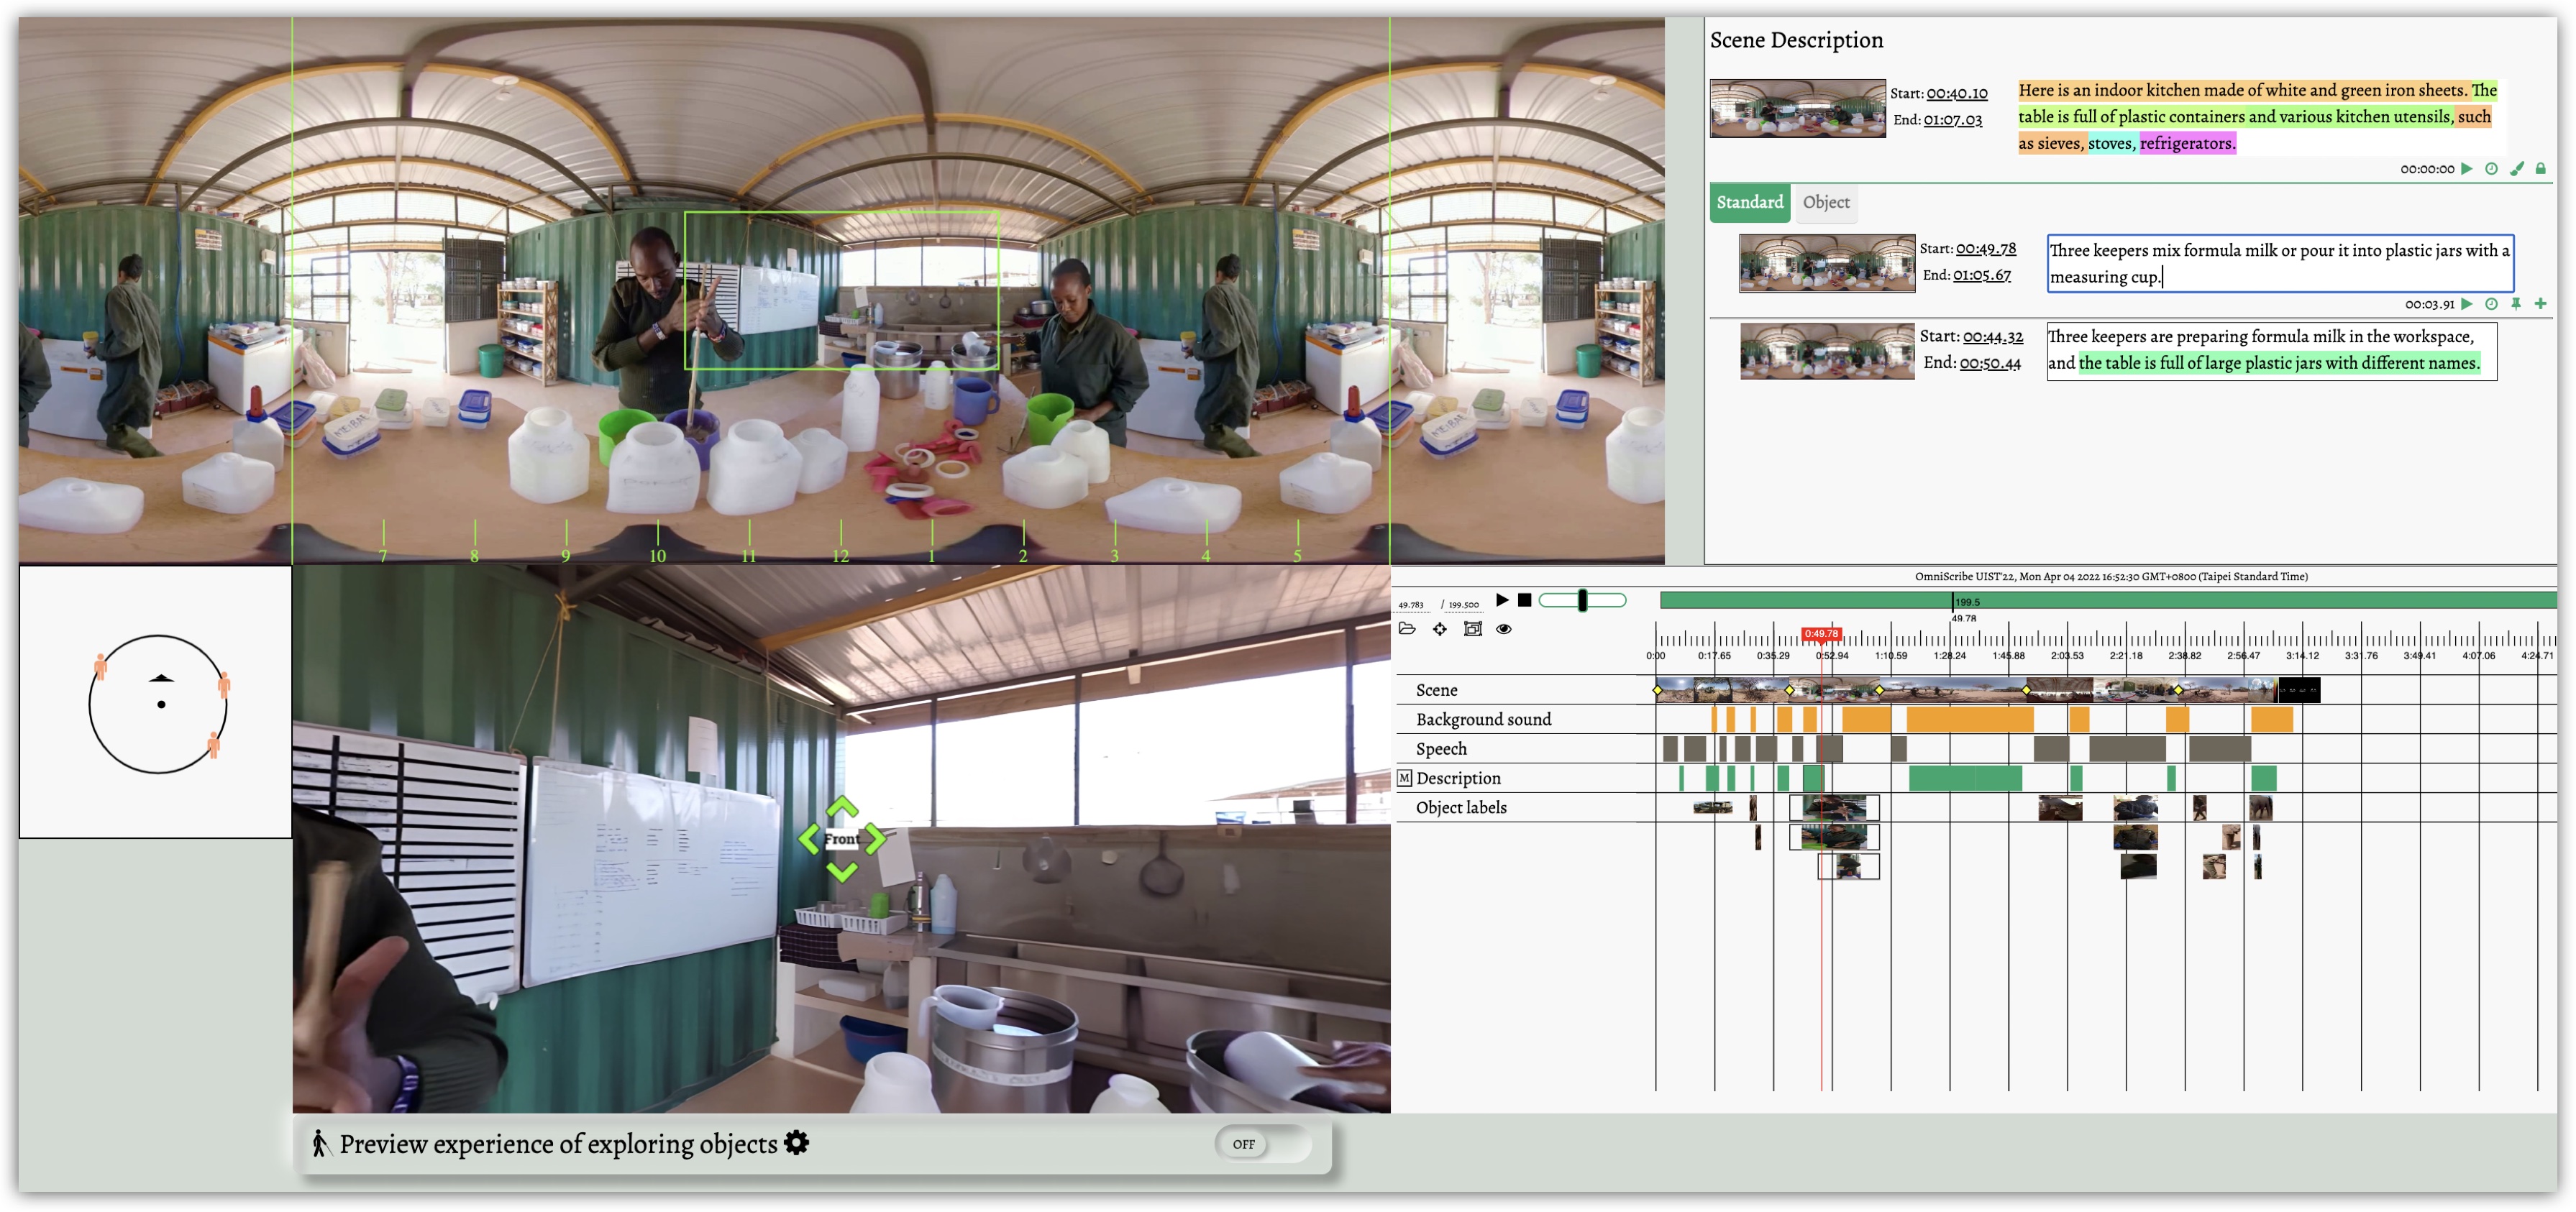 This is a figure of an overview of the OmniScribe interface.
        a. There are two video views. The left half of the overall picture is an augmented equirectangular view with a clock meter (top), and there is another normal field-of-view video view on the bottom. There are three people making formula milk for elephants in the equirectangular view. 
        b. This is a content map in the lower-left corner of the overall picture of the OmniScribe interface, presenting dynamic objects and the user's viewing angle. Now three people are standing around you; one is at ten o'clock, one is at two o’clock, and the other is at three o’clock.
        c. There is a description authoring panel in the upper right corner of the overall picture of OmniScribe interface. This panel is for authoring standard AD and scene and object descriptions. There are textboxes; for each textbox, there are widgets, including playing audio descriptions, creating descriptions, and estimating the duration of audio descriptions.
        d. A timeline panel in the lower right corner of the overall picture helps users visualize the scenes, described objects, audio content, and ADs. This figure describes the detailed functionalities of OmniScribe timeline components. First, four toggles from left to the right for selecting video files, section division, object tracking, and saliency. Second, there are four rows from top to bottom: Timelines for the scene, Background sound, Speech in the original video, and User's description. Third, a region below the four rows mentioned above. The objects made with immersive labels are visualized in this timeline panel.